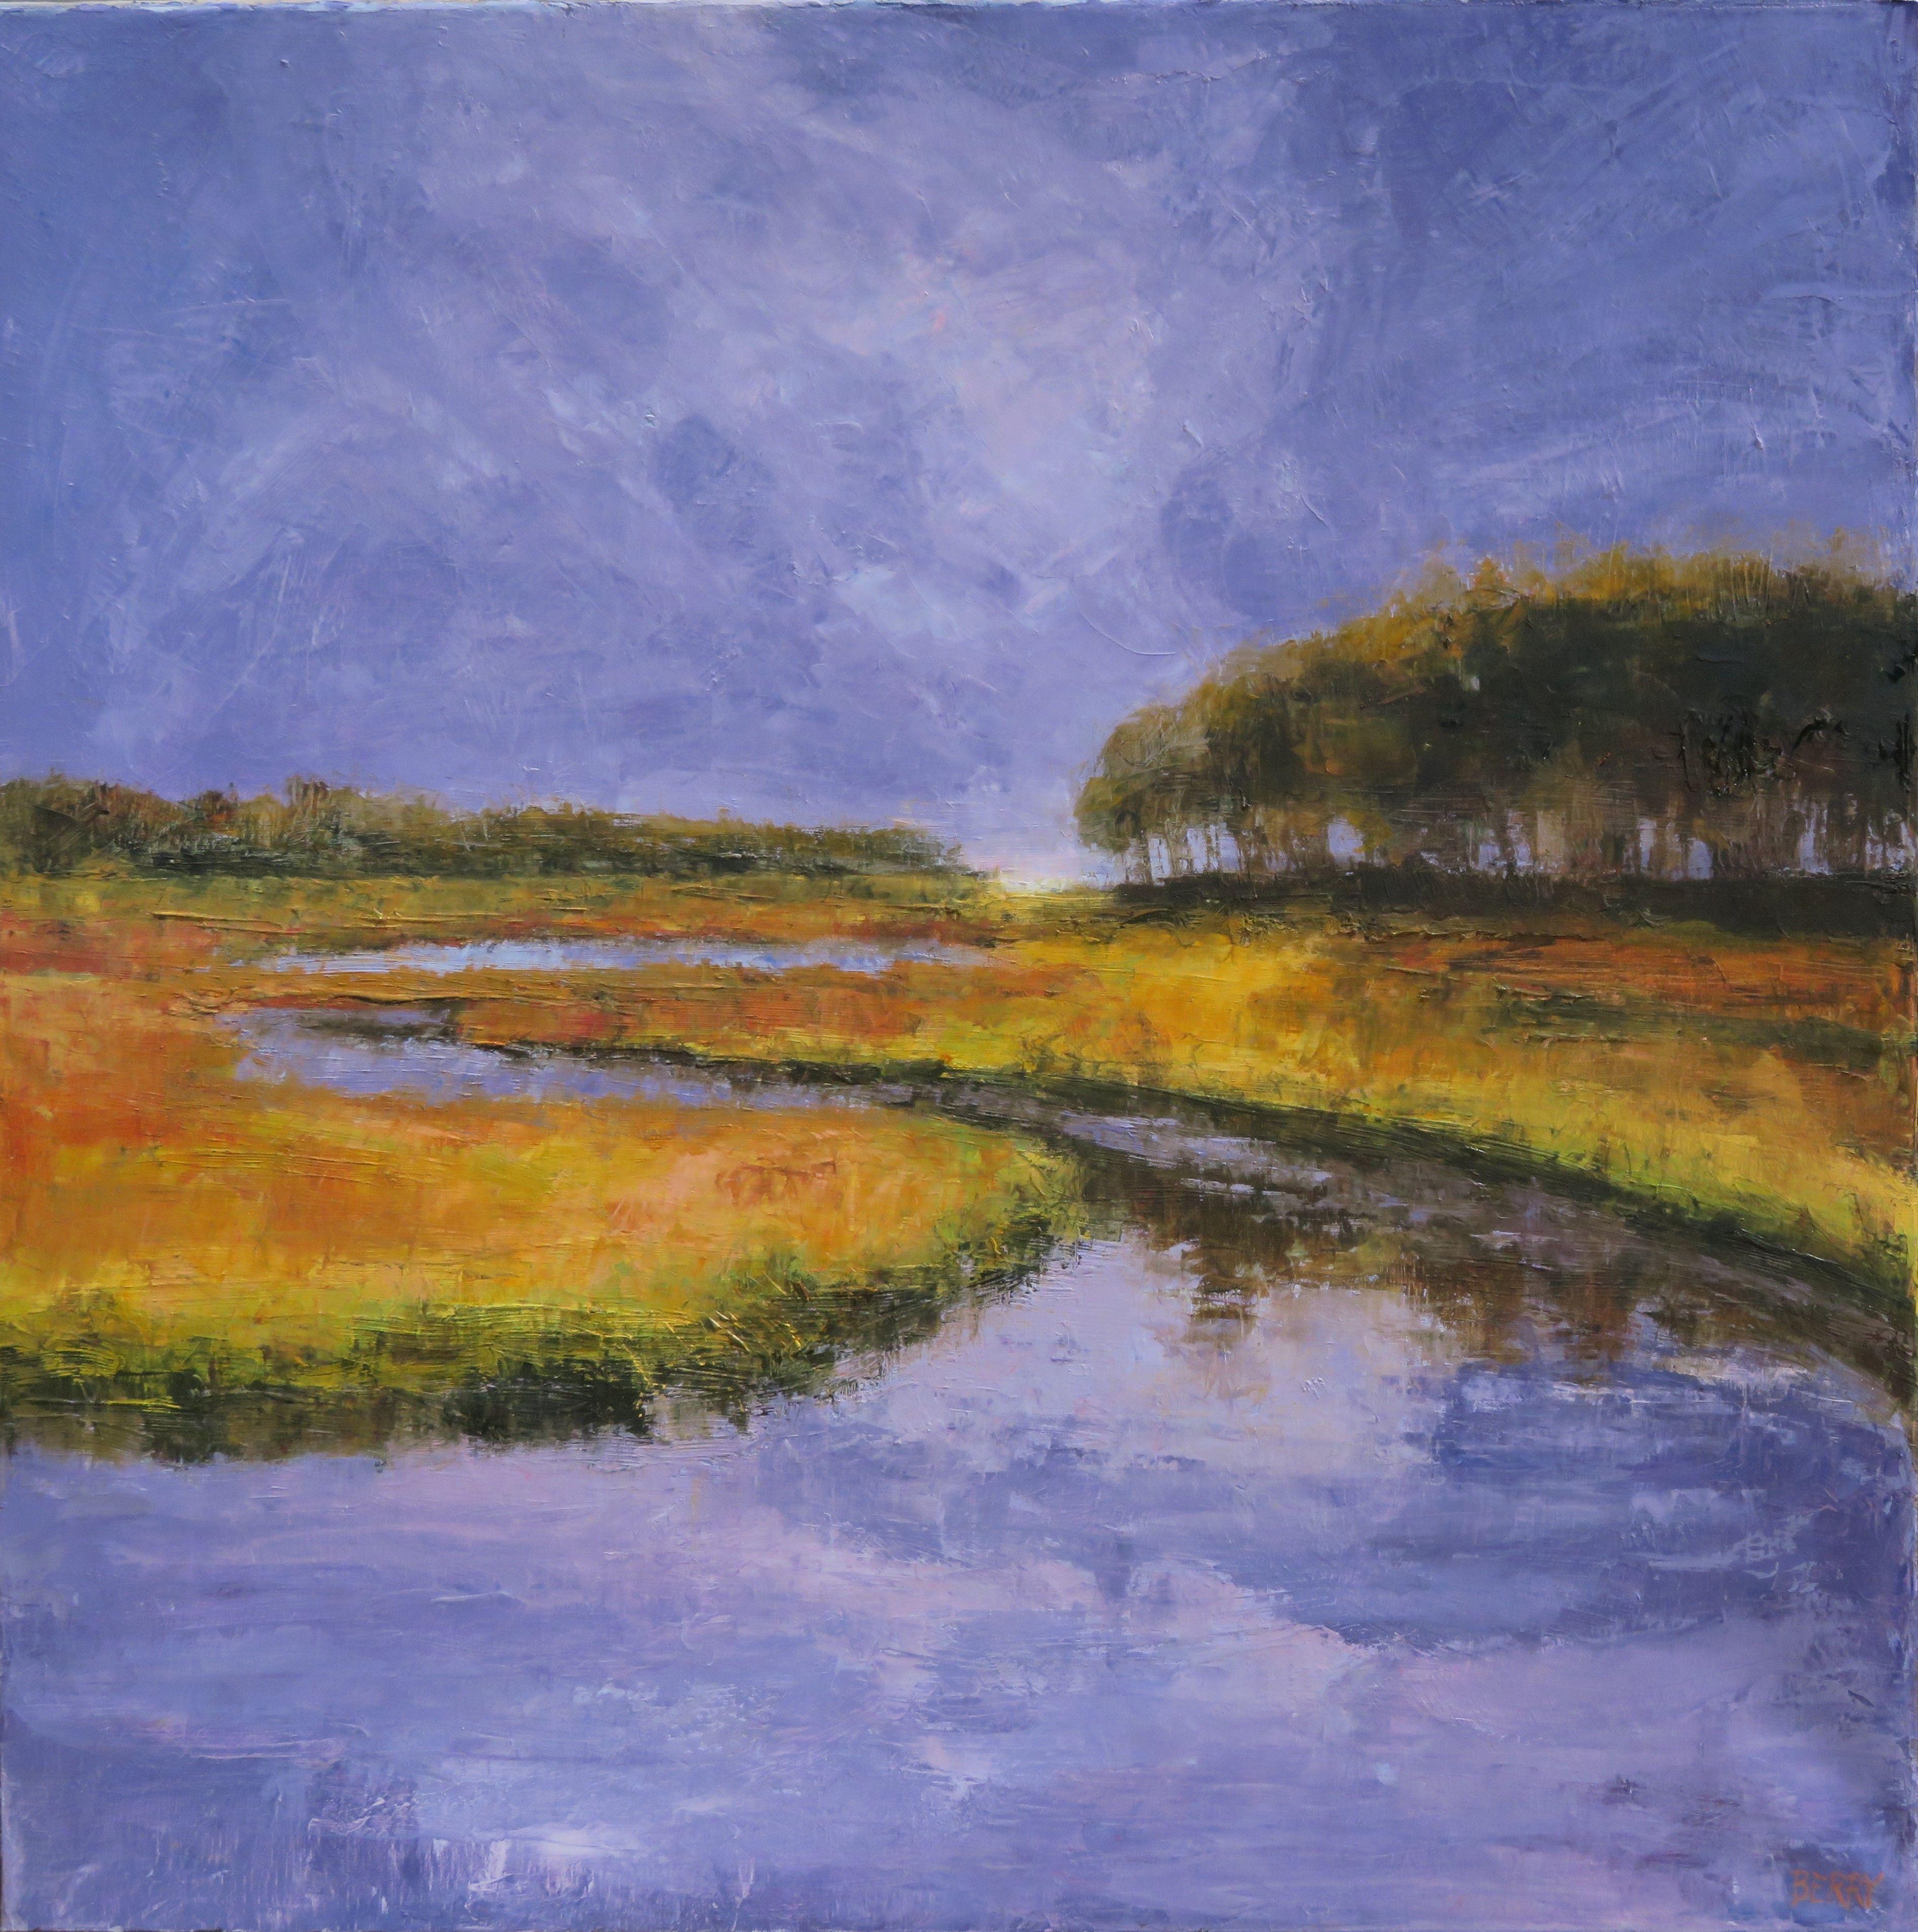 The Rachel Carson Reserve is a lovely tidal marsh area that is home to a variety of ocean life, birds and wildlife.  The lazy river that runs through it to the ocean changes with the tides.  This was done with quality oil paints and cold wax on